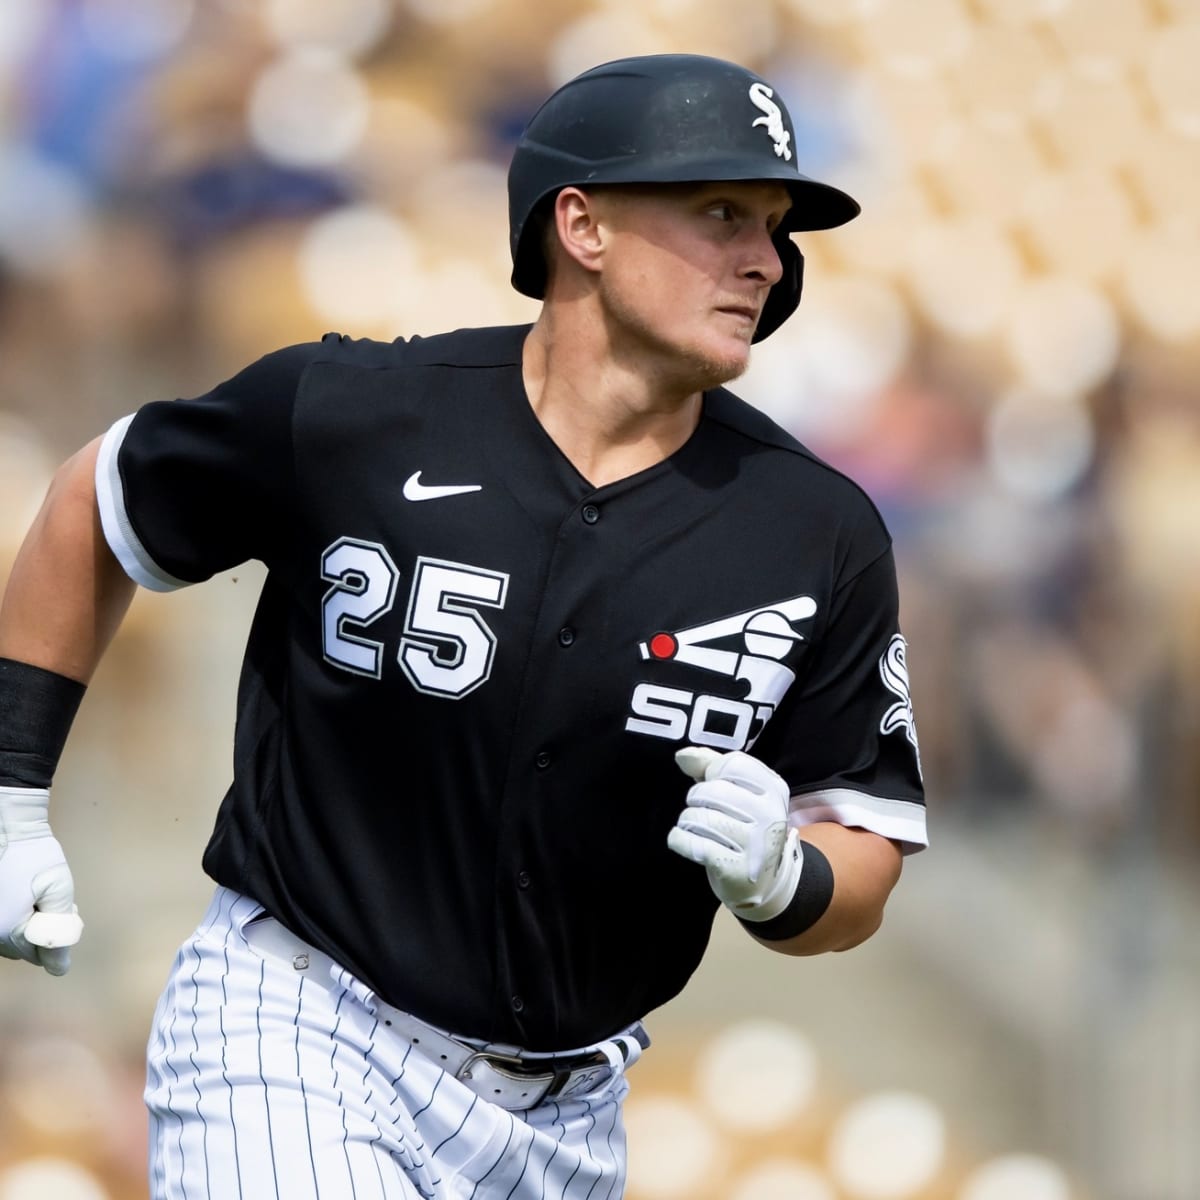 Cal Baseball: Andrew Vaughn Out With Sore Back - Sox Say They're